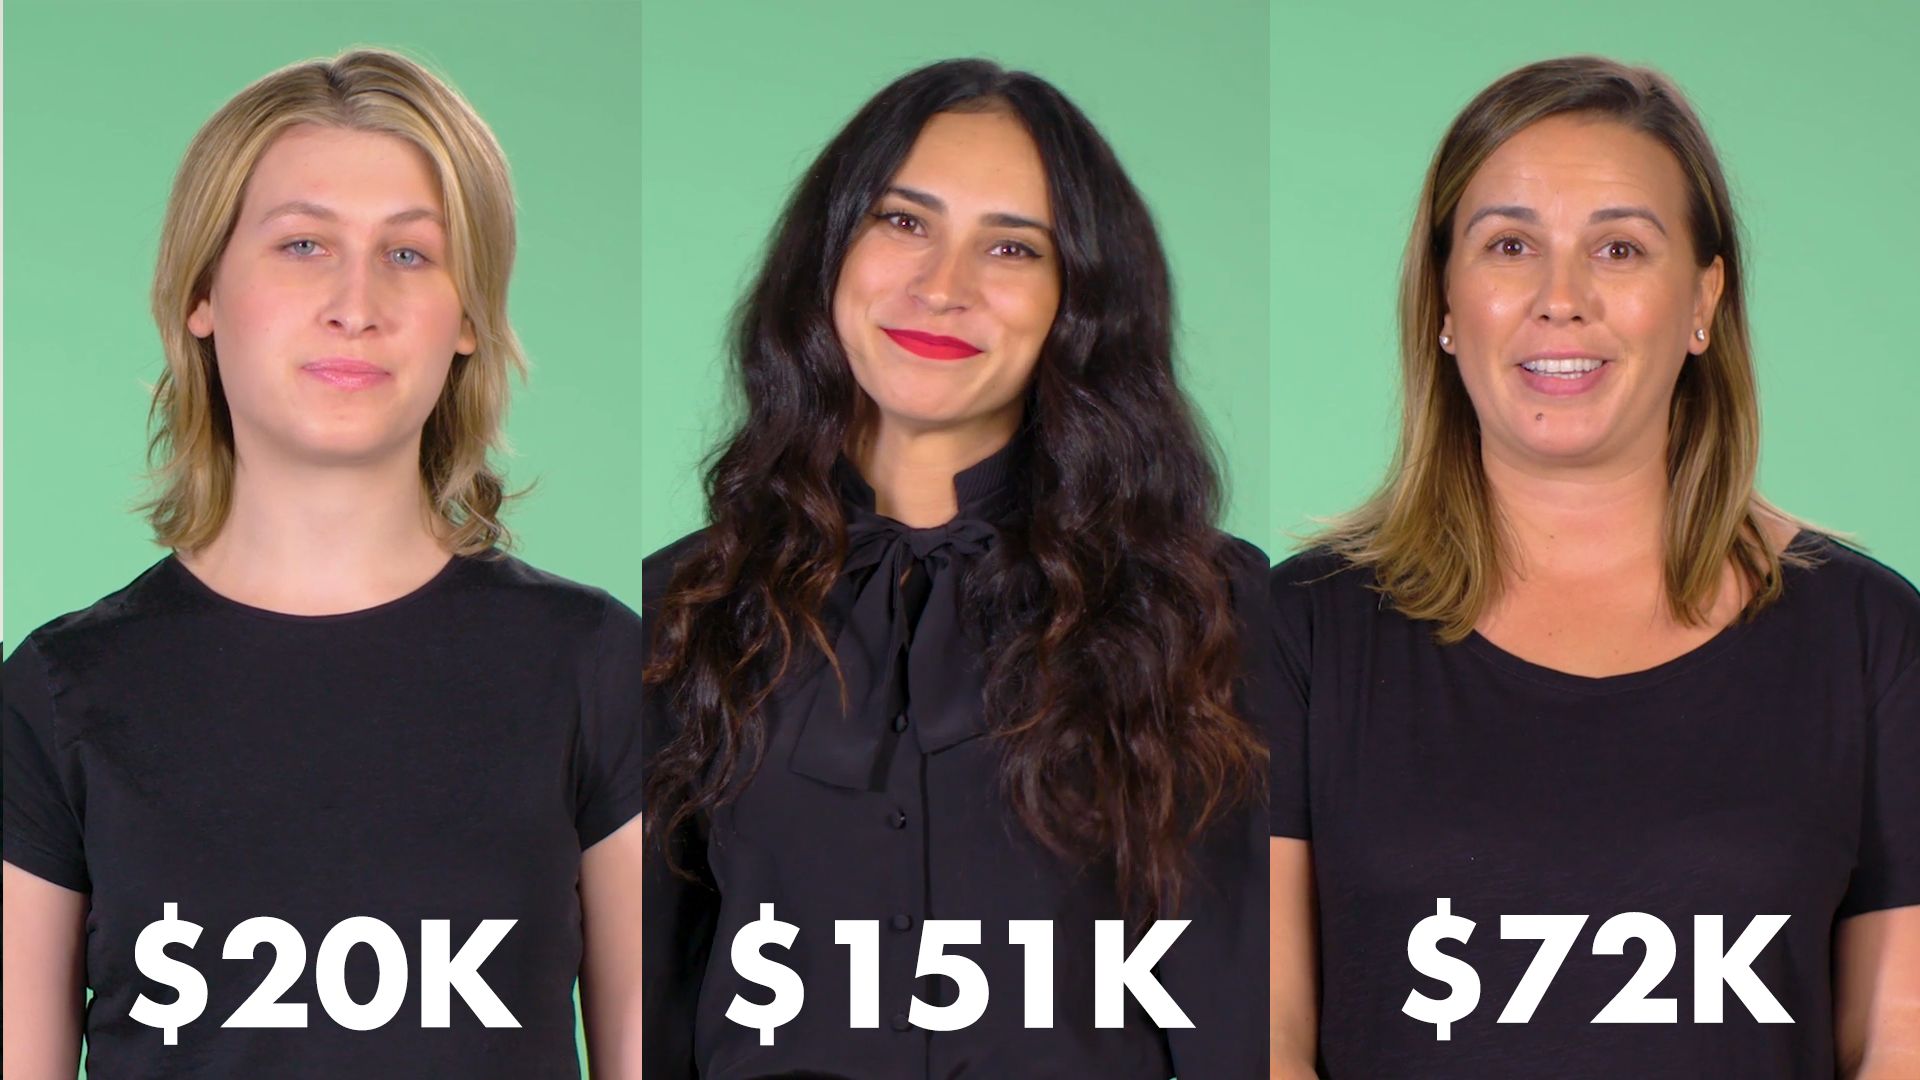 Watch Women of Different Salaries on If They Got a $5,000 Medical Bill ...